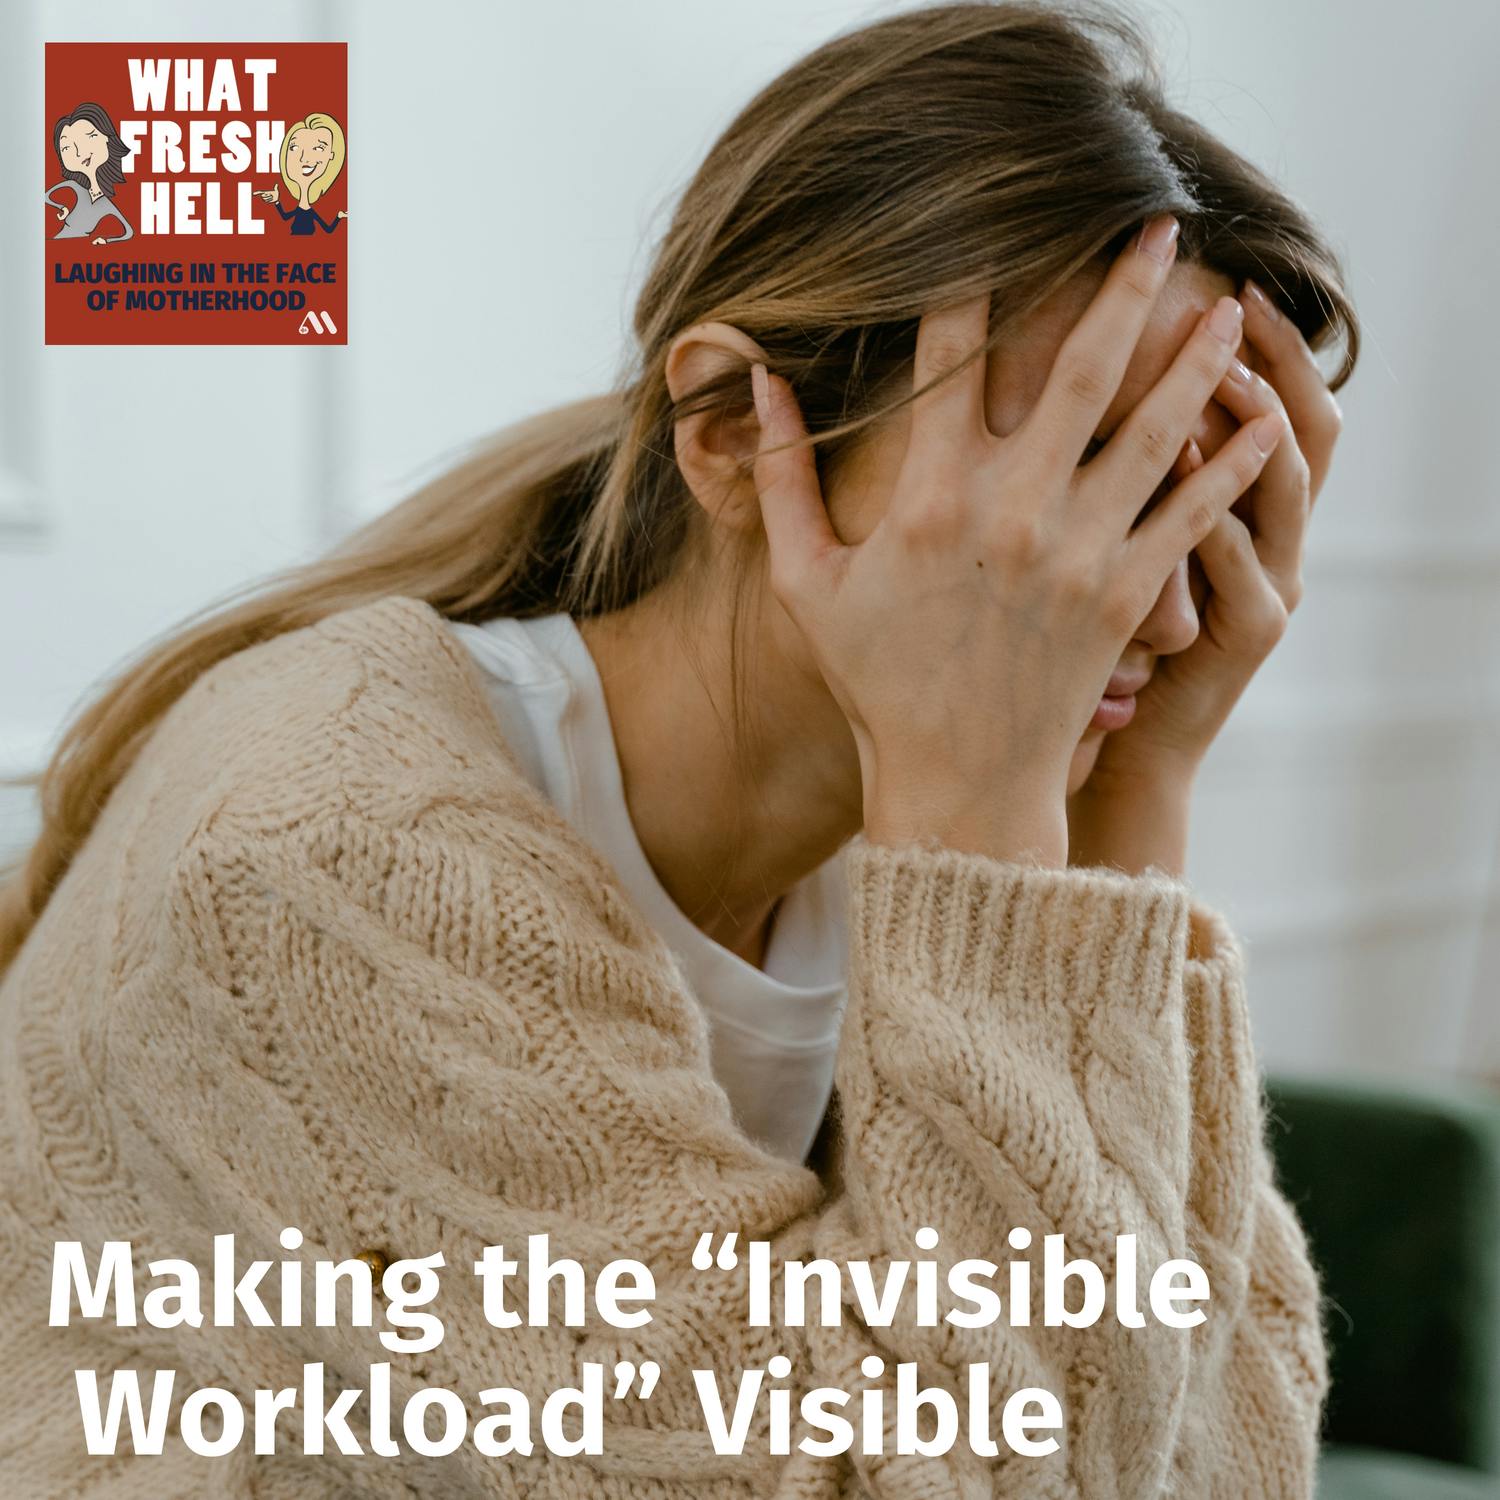 Making the ”Invisible Workload” Visible